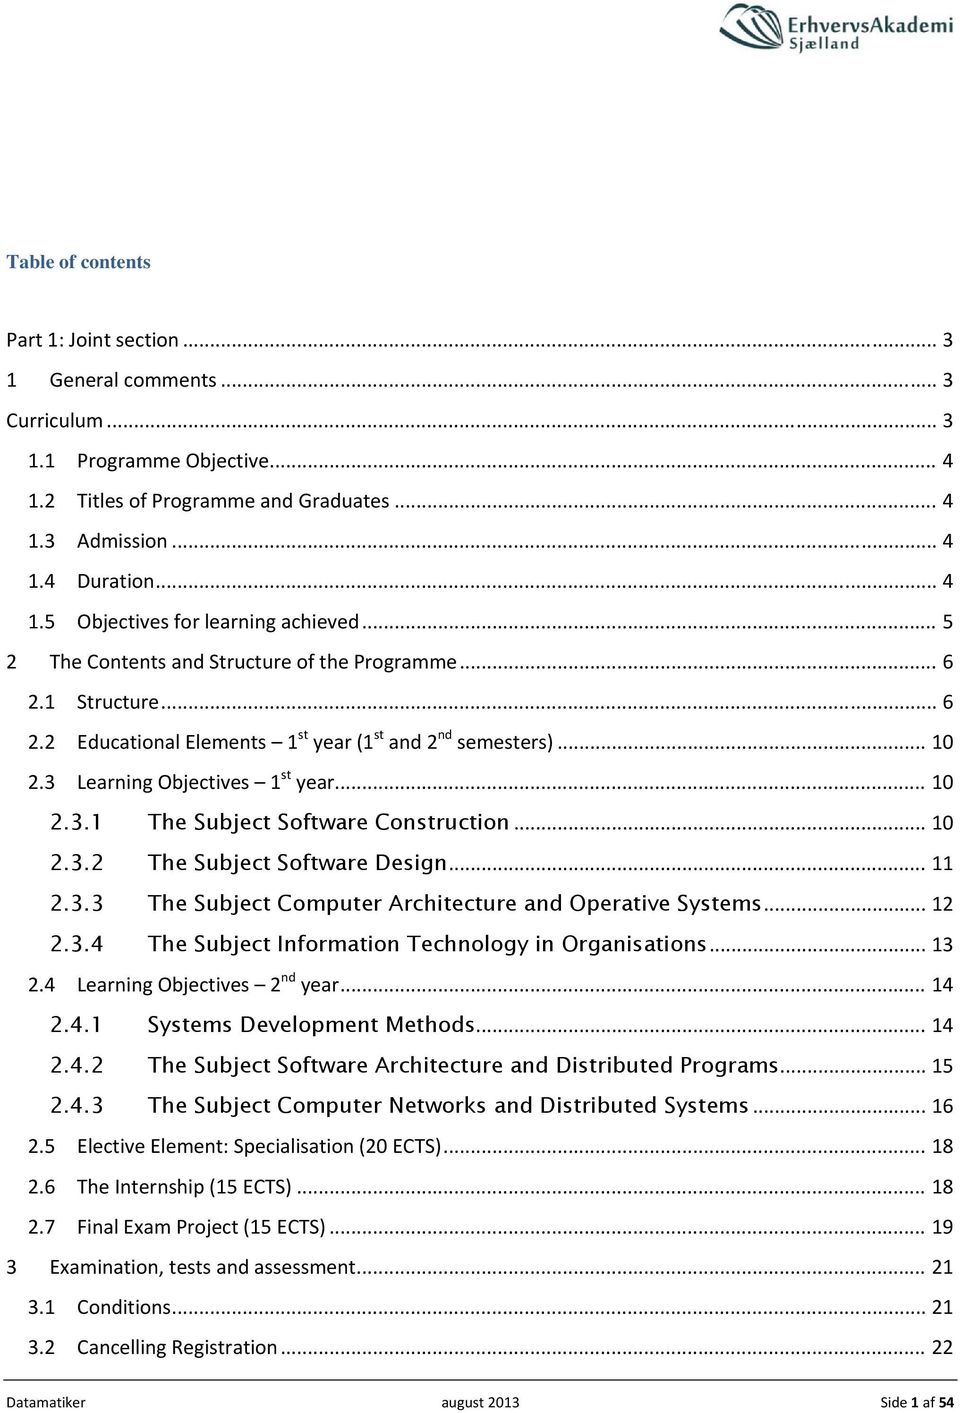 .. 10 2.3.2 The Subject Software Design... 11 2.3.3 The Subject Computer Architecture and Operative Systems... 12 2.3.4 The Subject Information Technology in Organisations... 13 2.